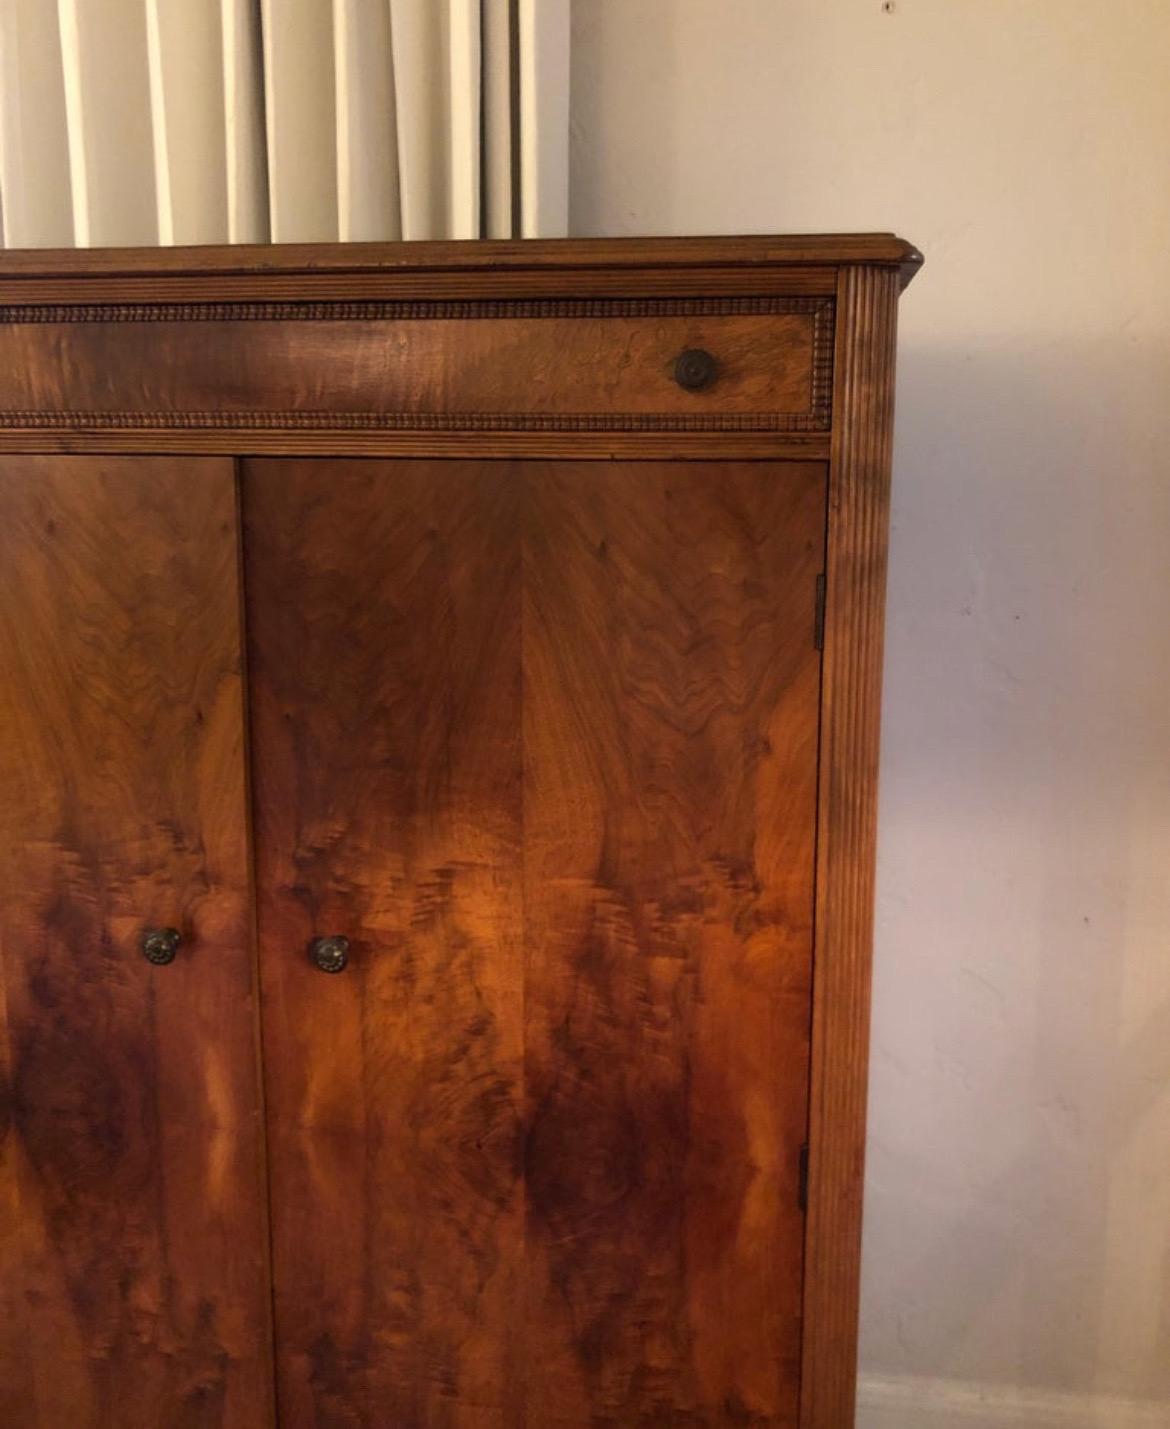 19th century German style small Bedermeier armoire/wardrobe with burl wood cherry.
One long drawer at the top. Interior has shaves and three drawers.
Sits on top of carved legs with castors.
A fine example of clean lines with minimal ornamentation